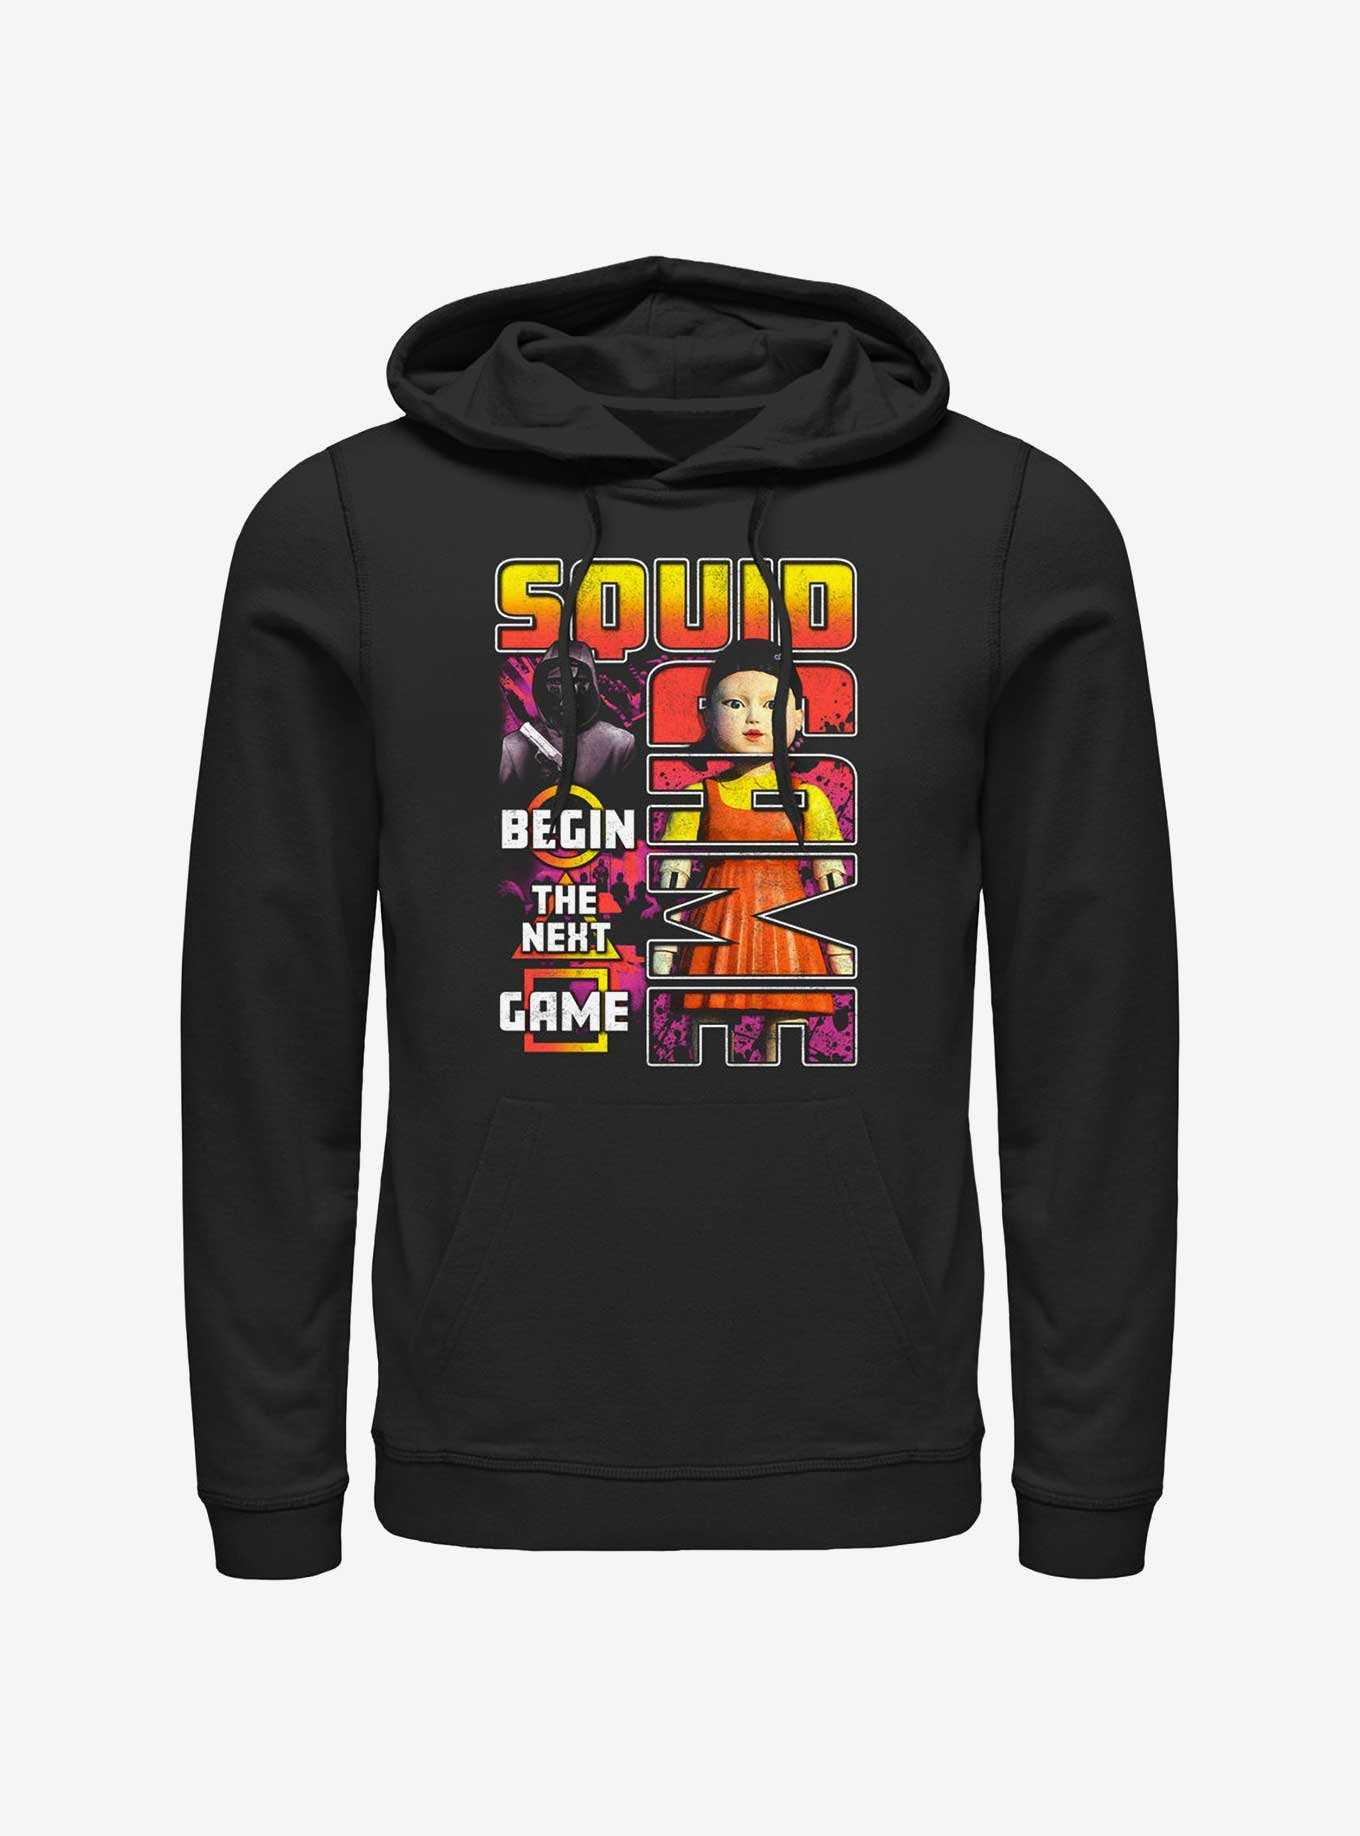 Squid Game Masked Man and Young-Hee Doll Star The Next Game Hoodie, , hi-res